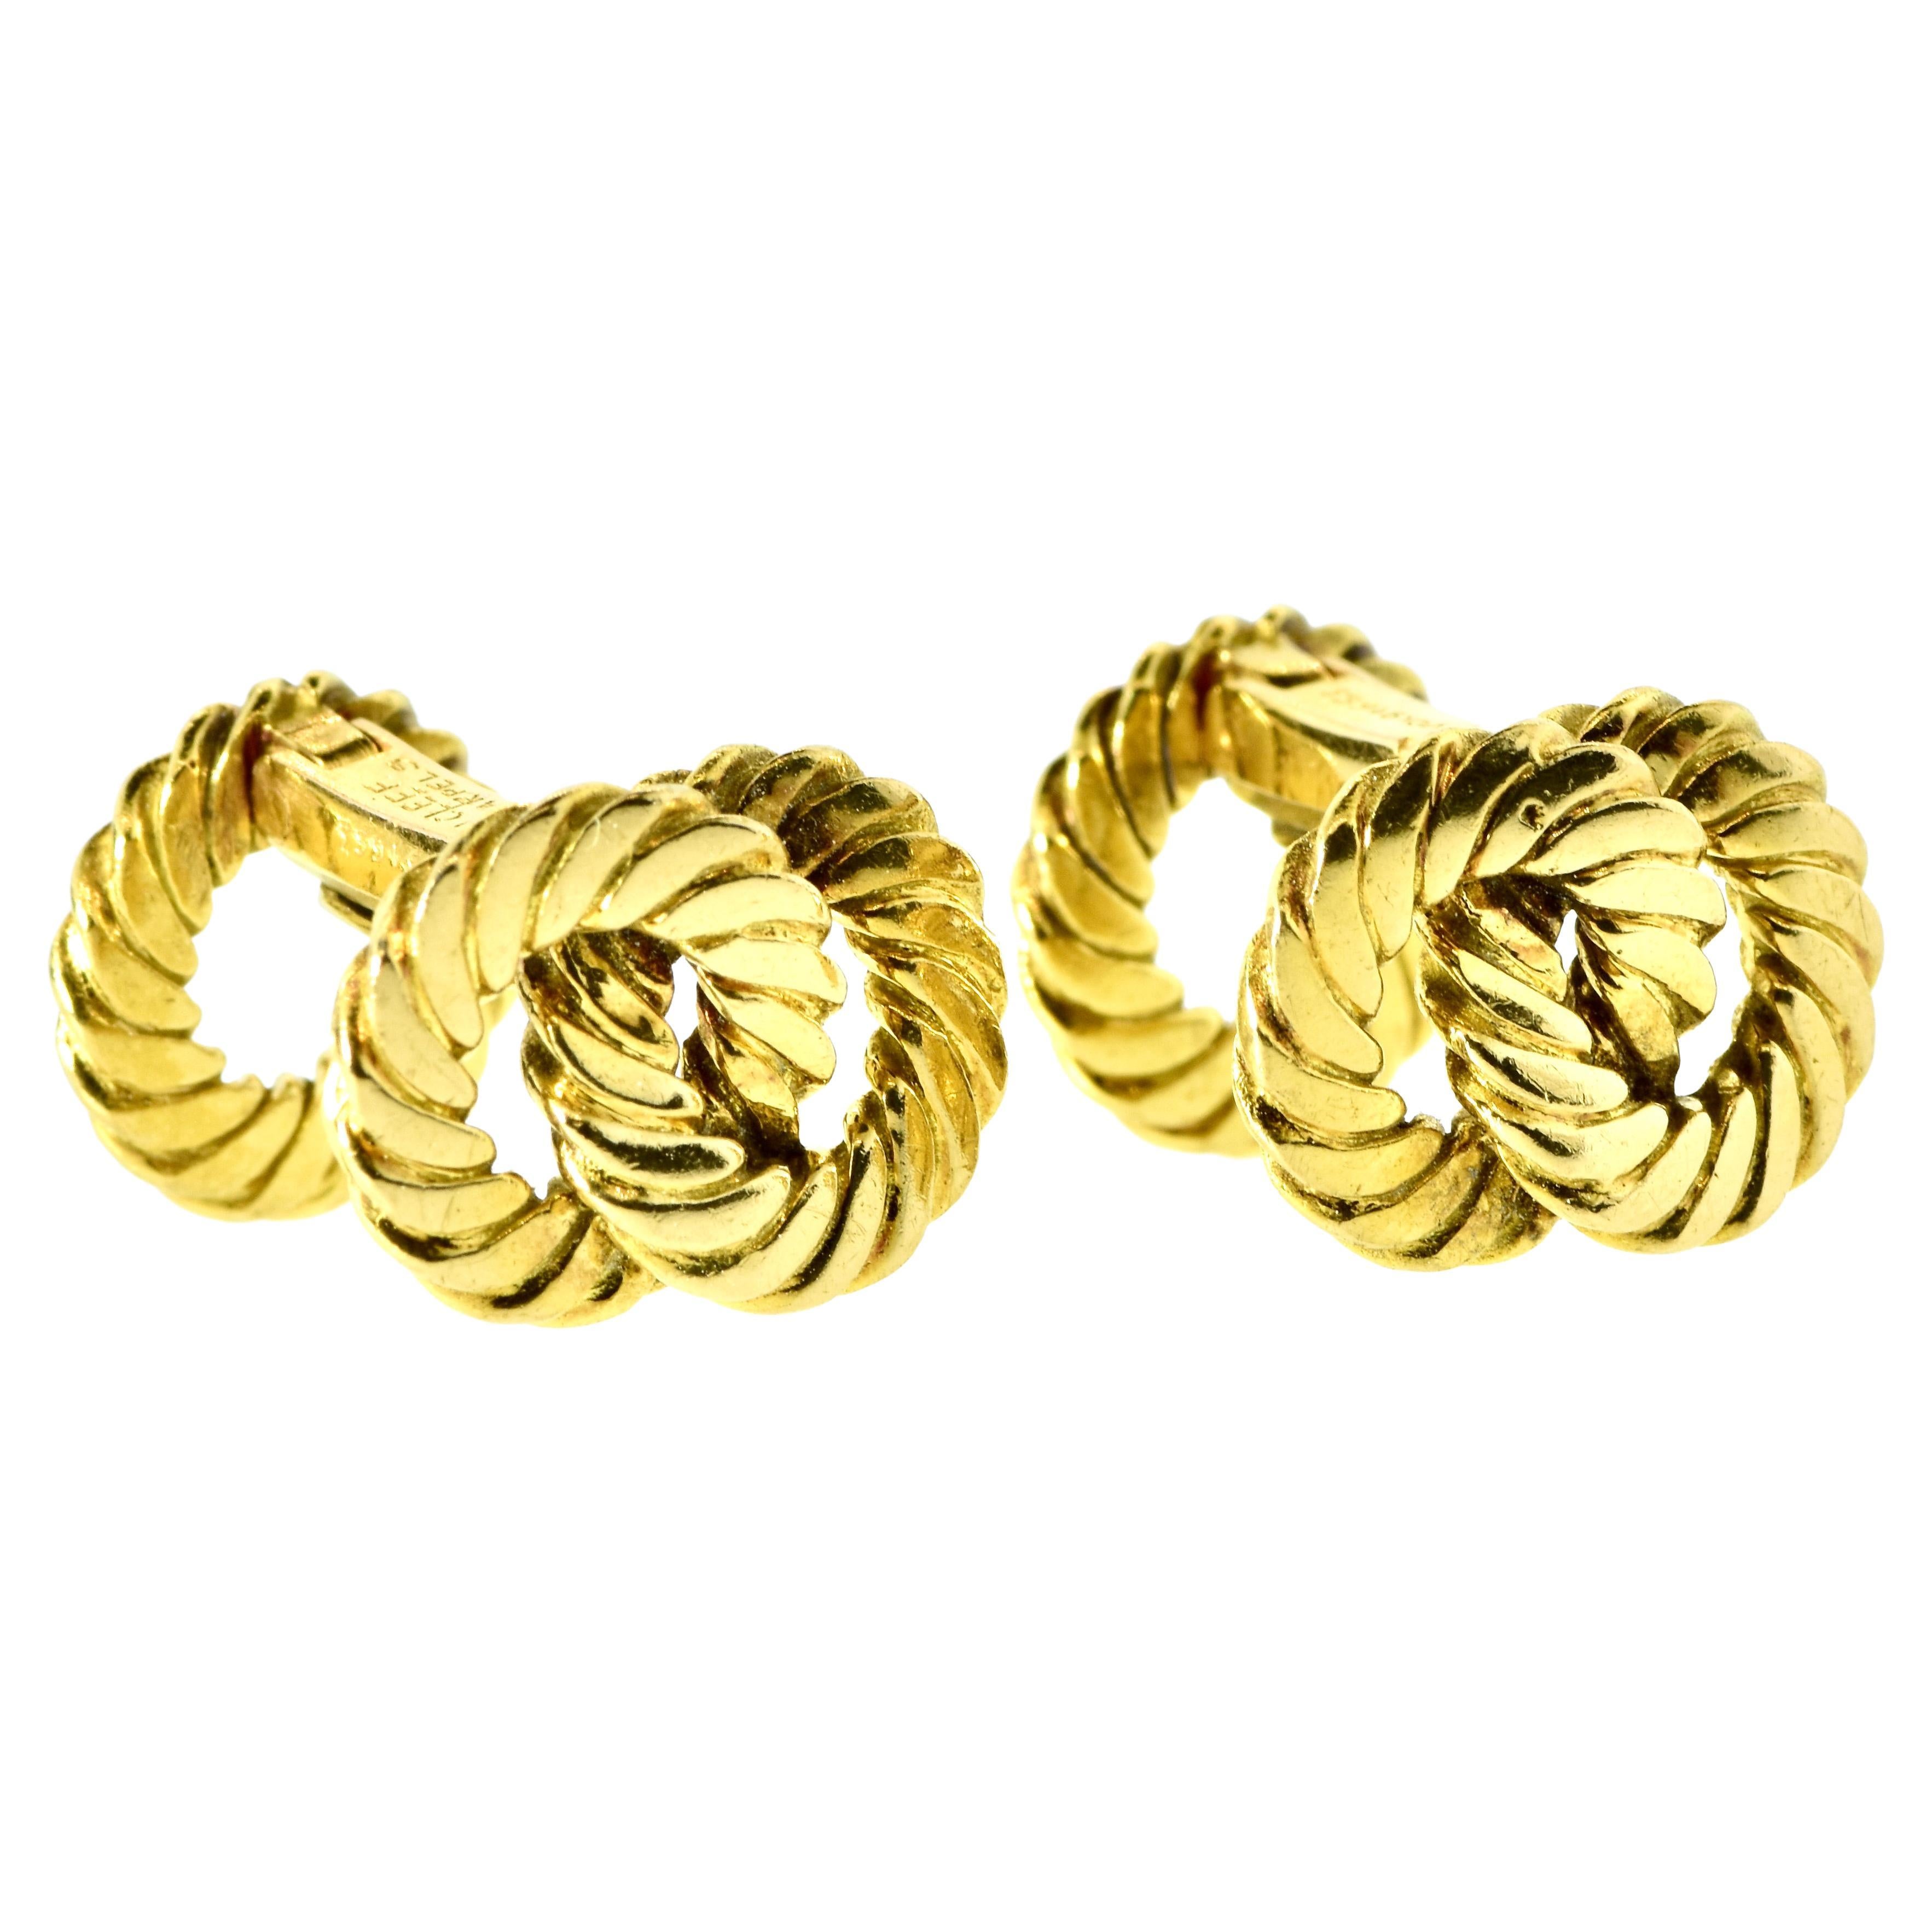 Cufflinks by George L'Enfant for Van Cleef & Arpels, designed as a series of interlocking links, each finely carved.  The cufflinks are signed, hallmarked and numbered along with French gold marks.  The cufflinks, each side slightly different, are